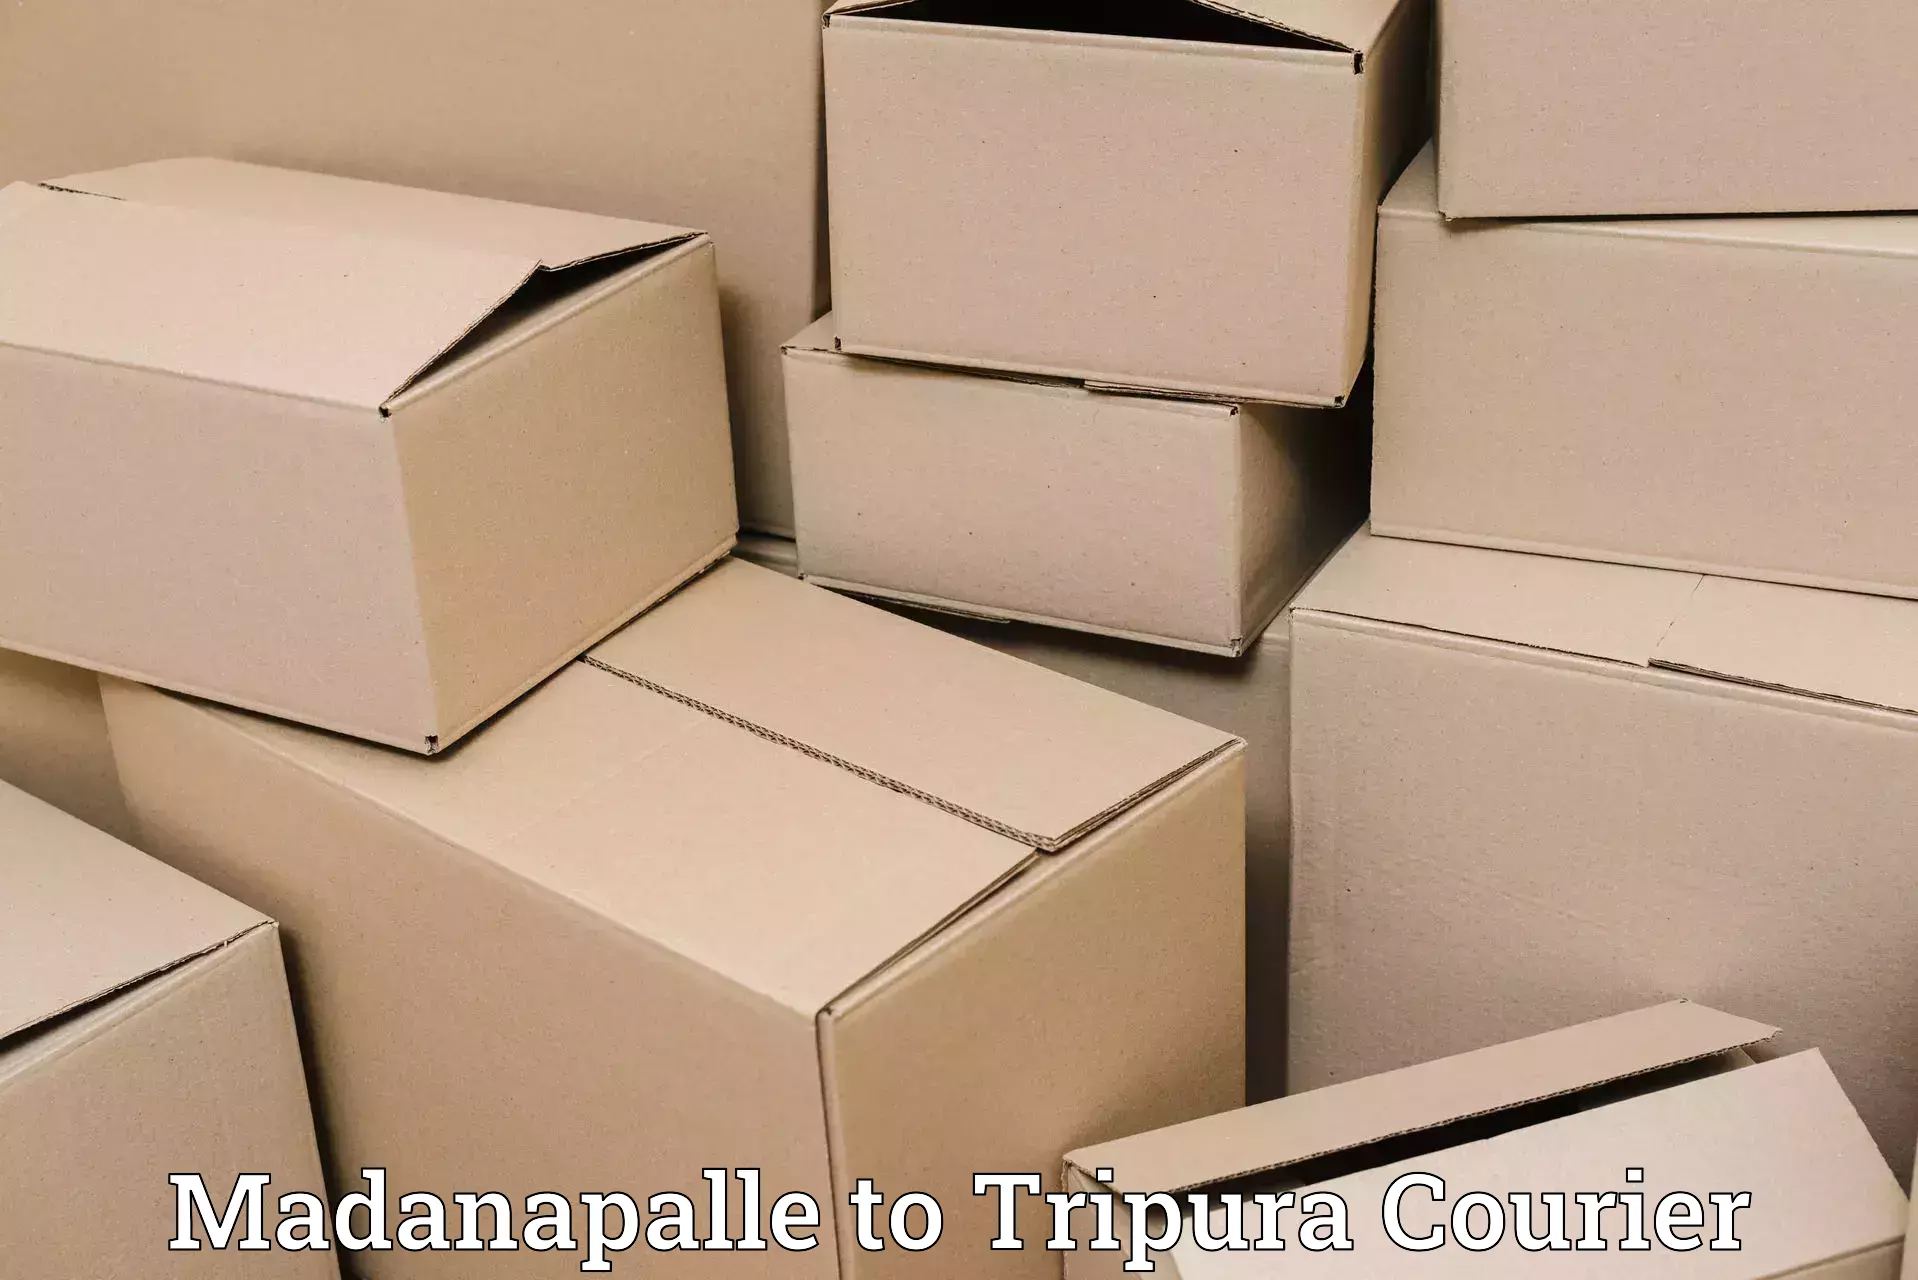 Nationwide courier service Madanapalle to Aambasa